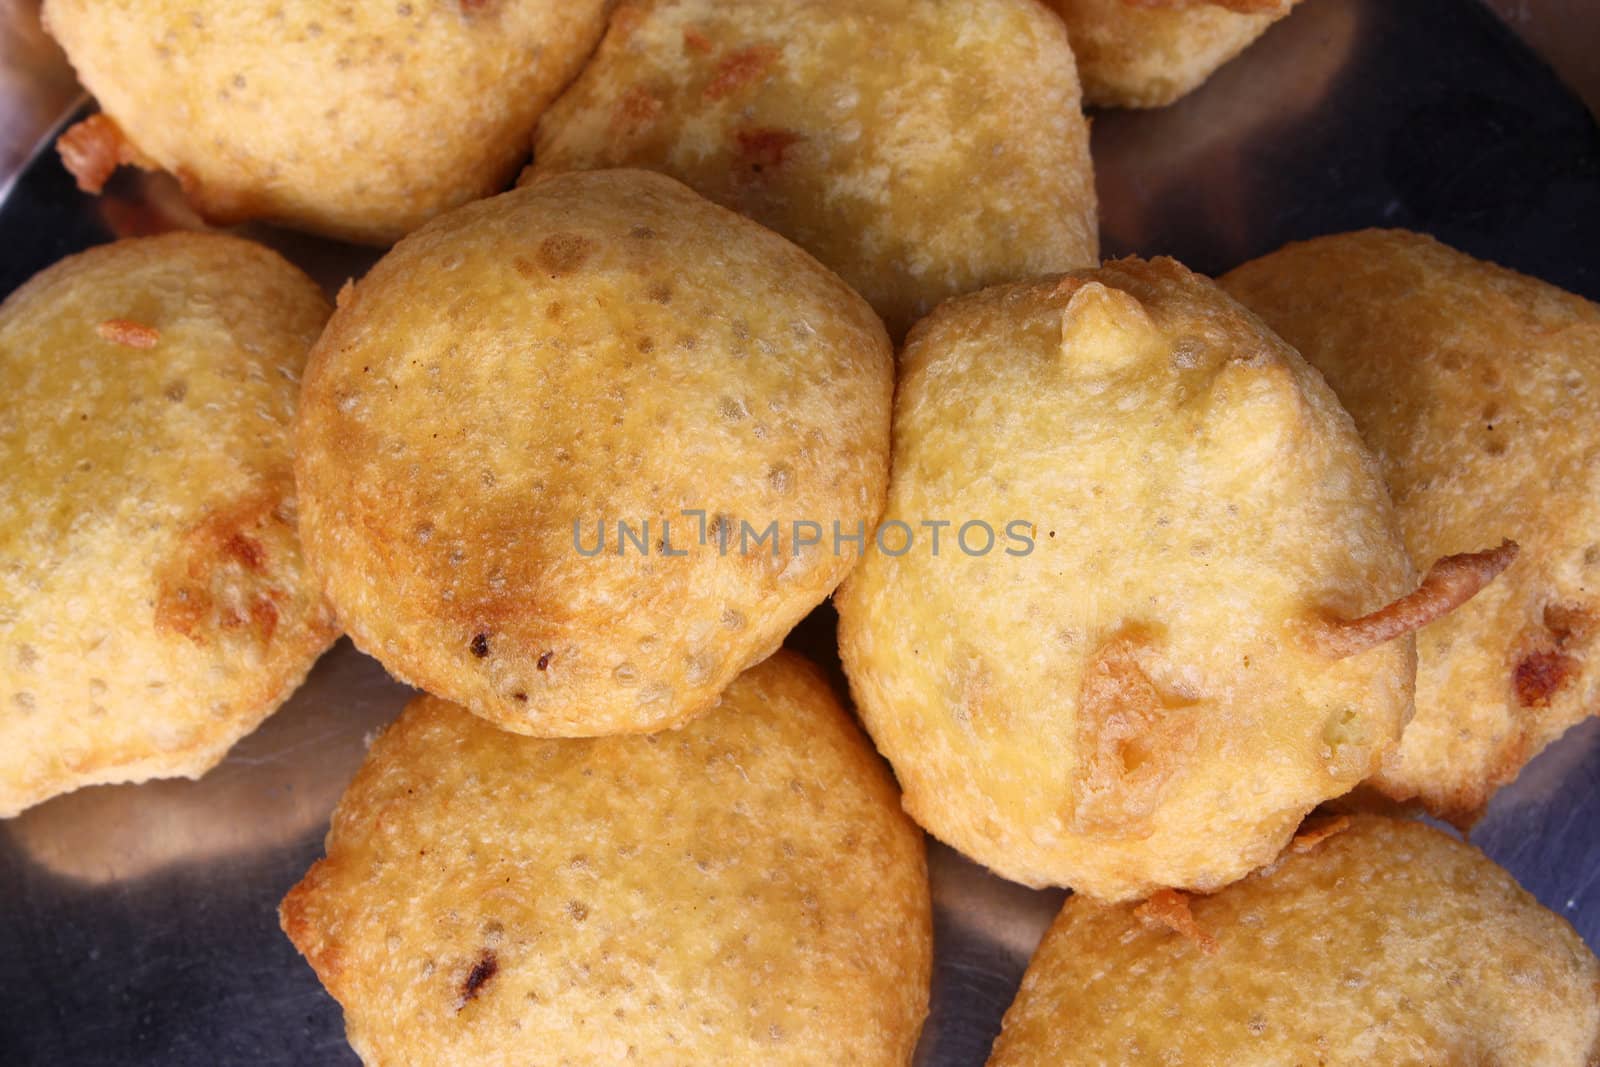 An Indian fast-food dish called as batata/aloo wada, which is like a potato burger.